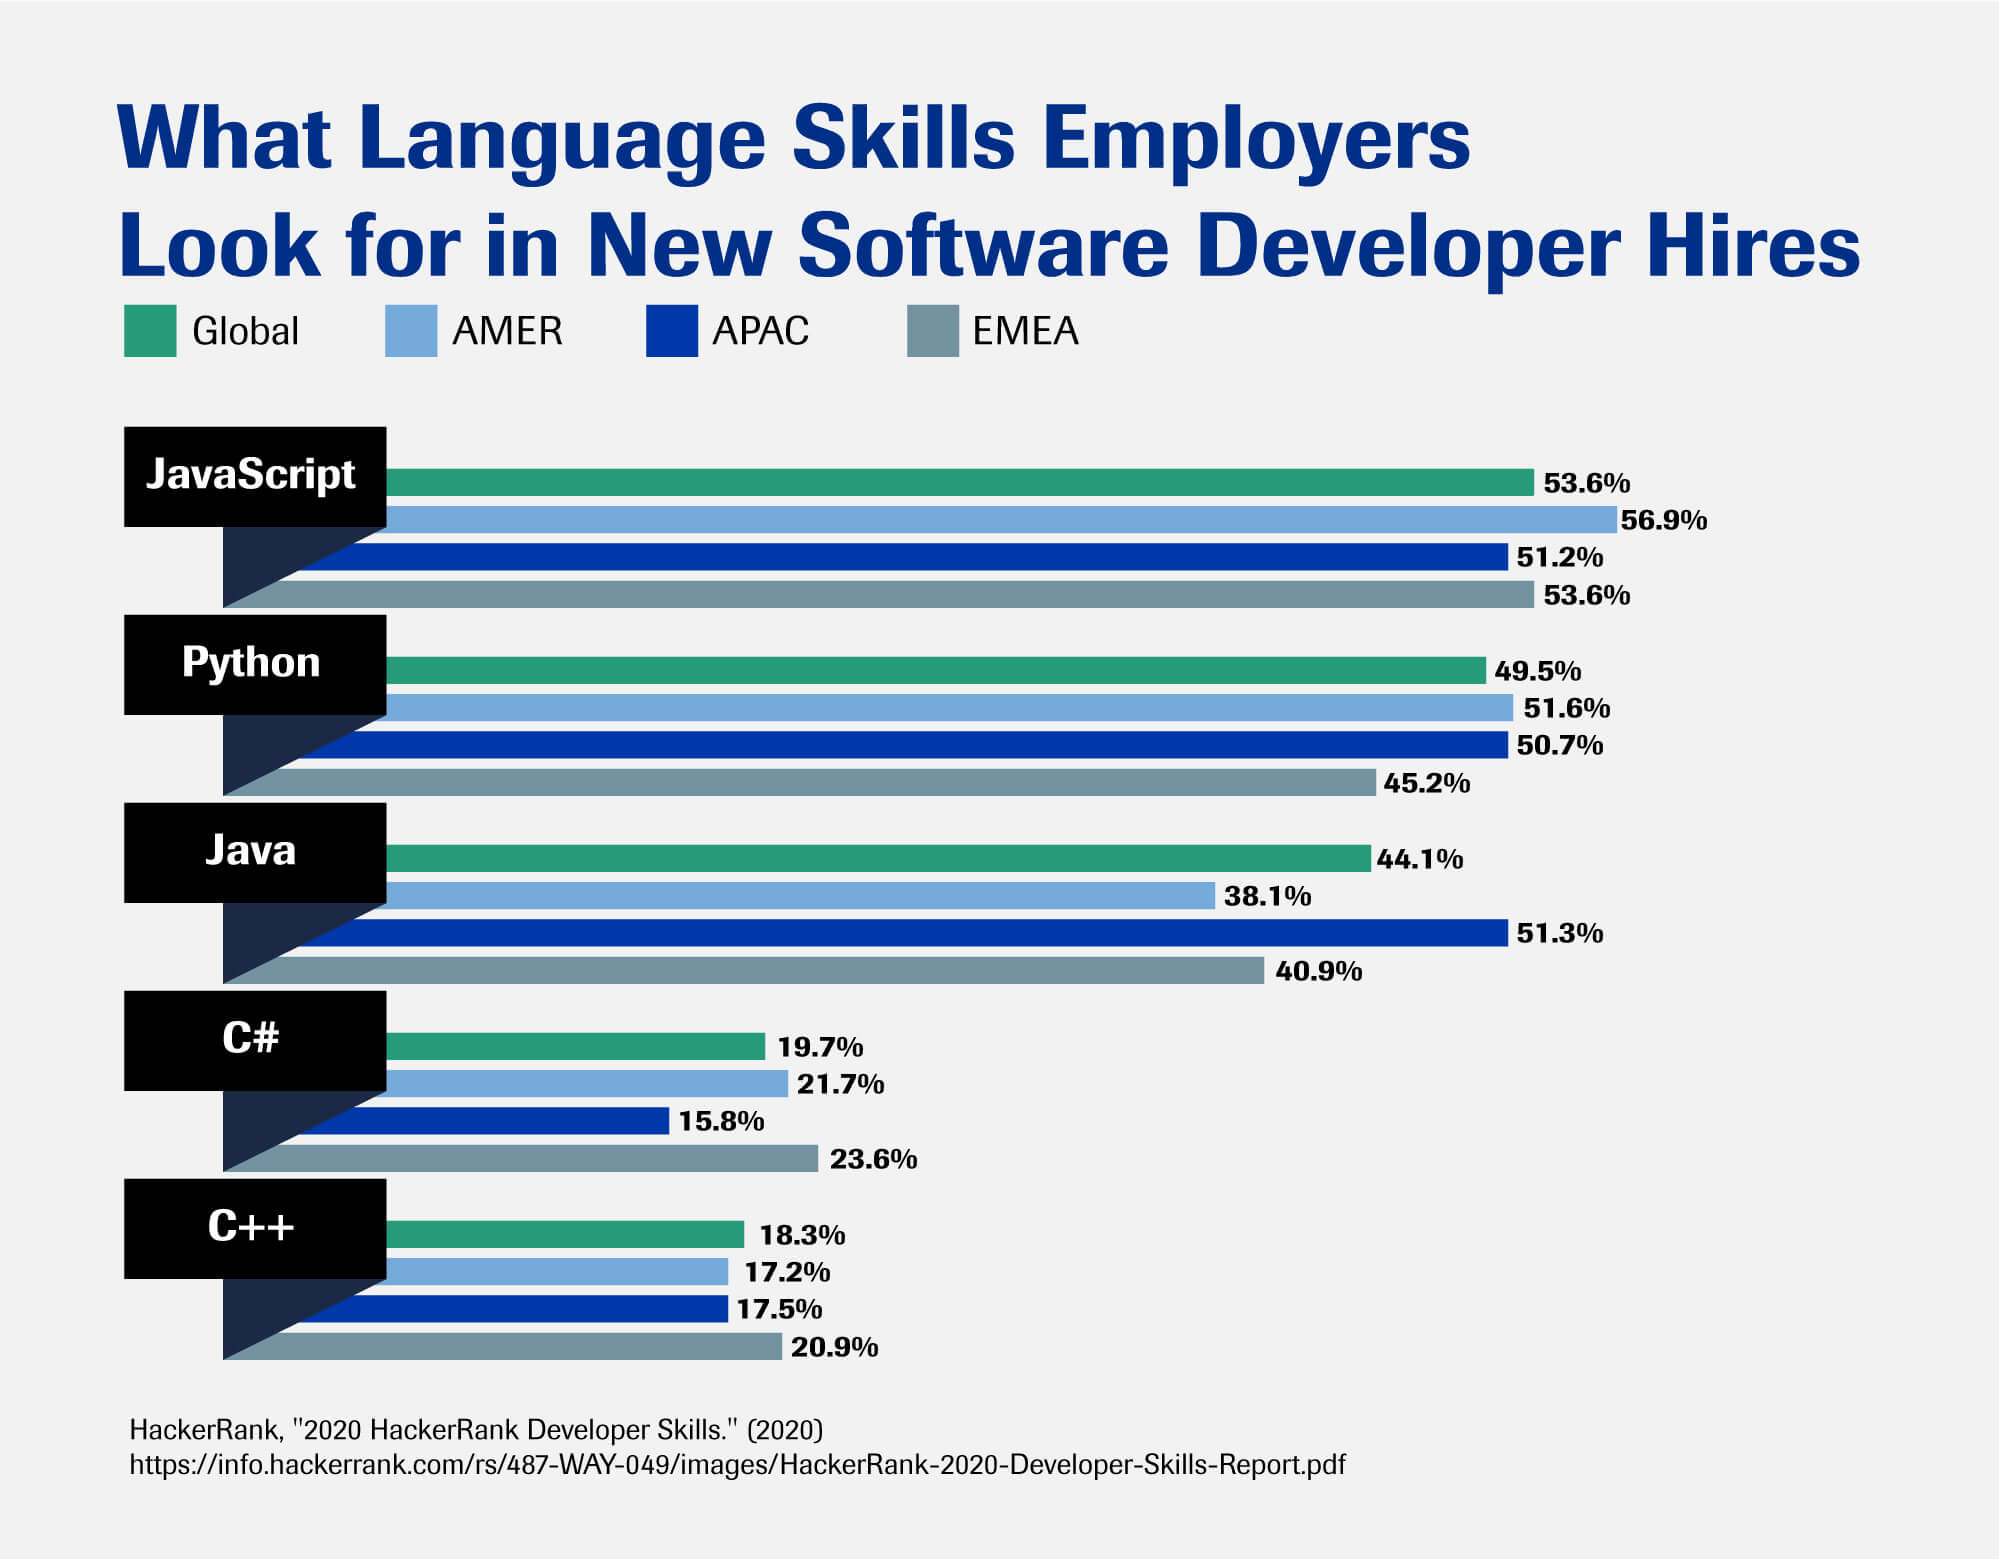 A graph showing the language skills employers look for in software developers